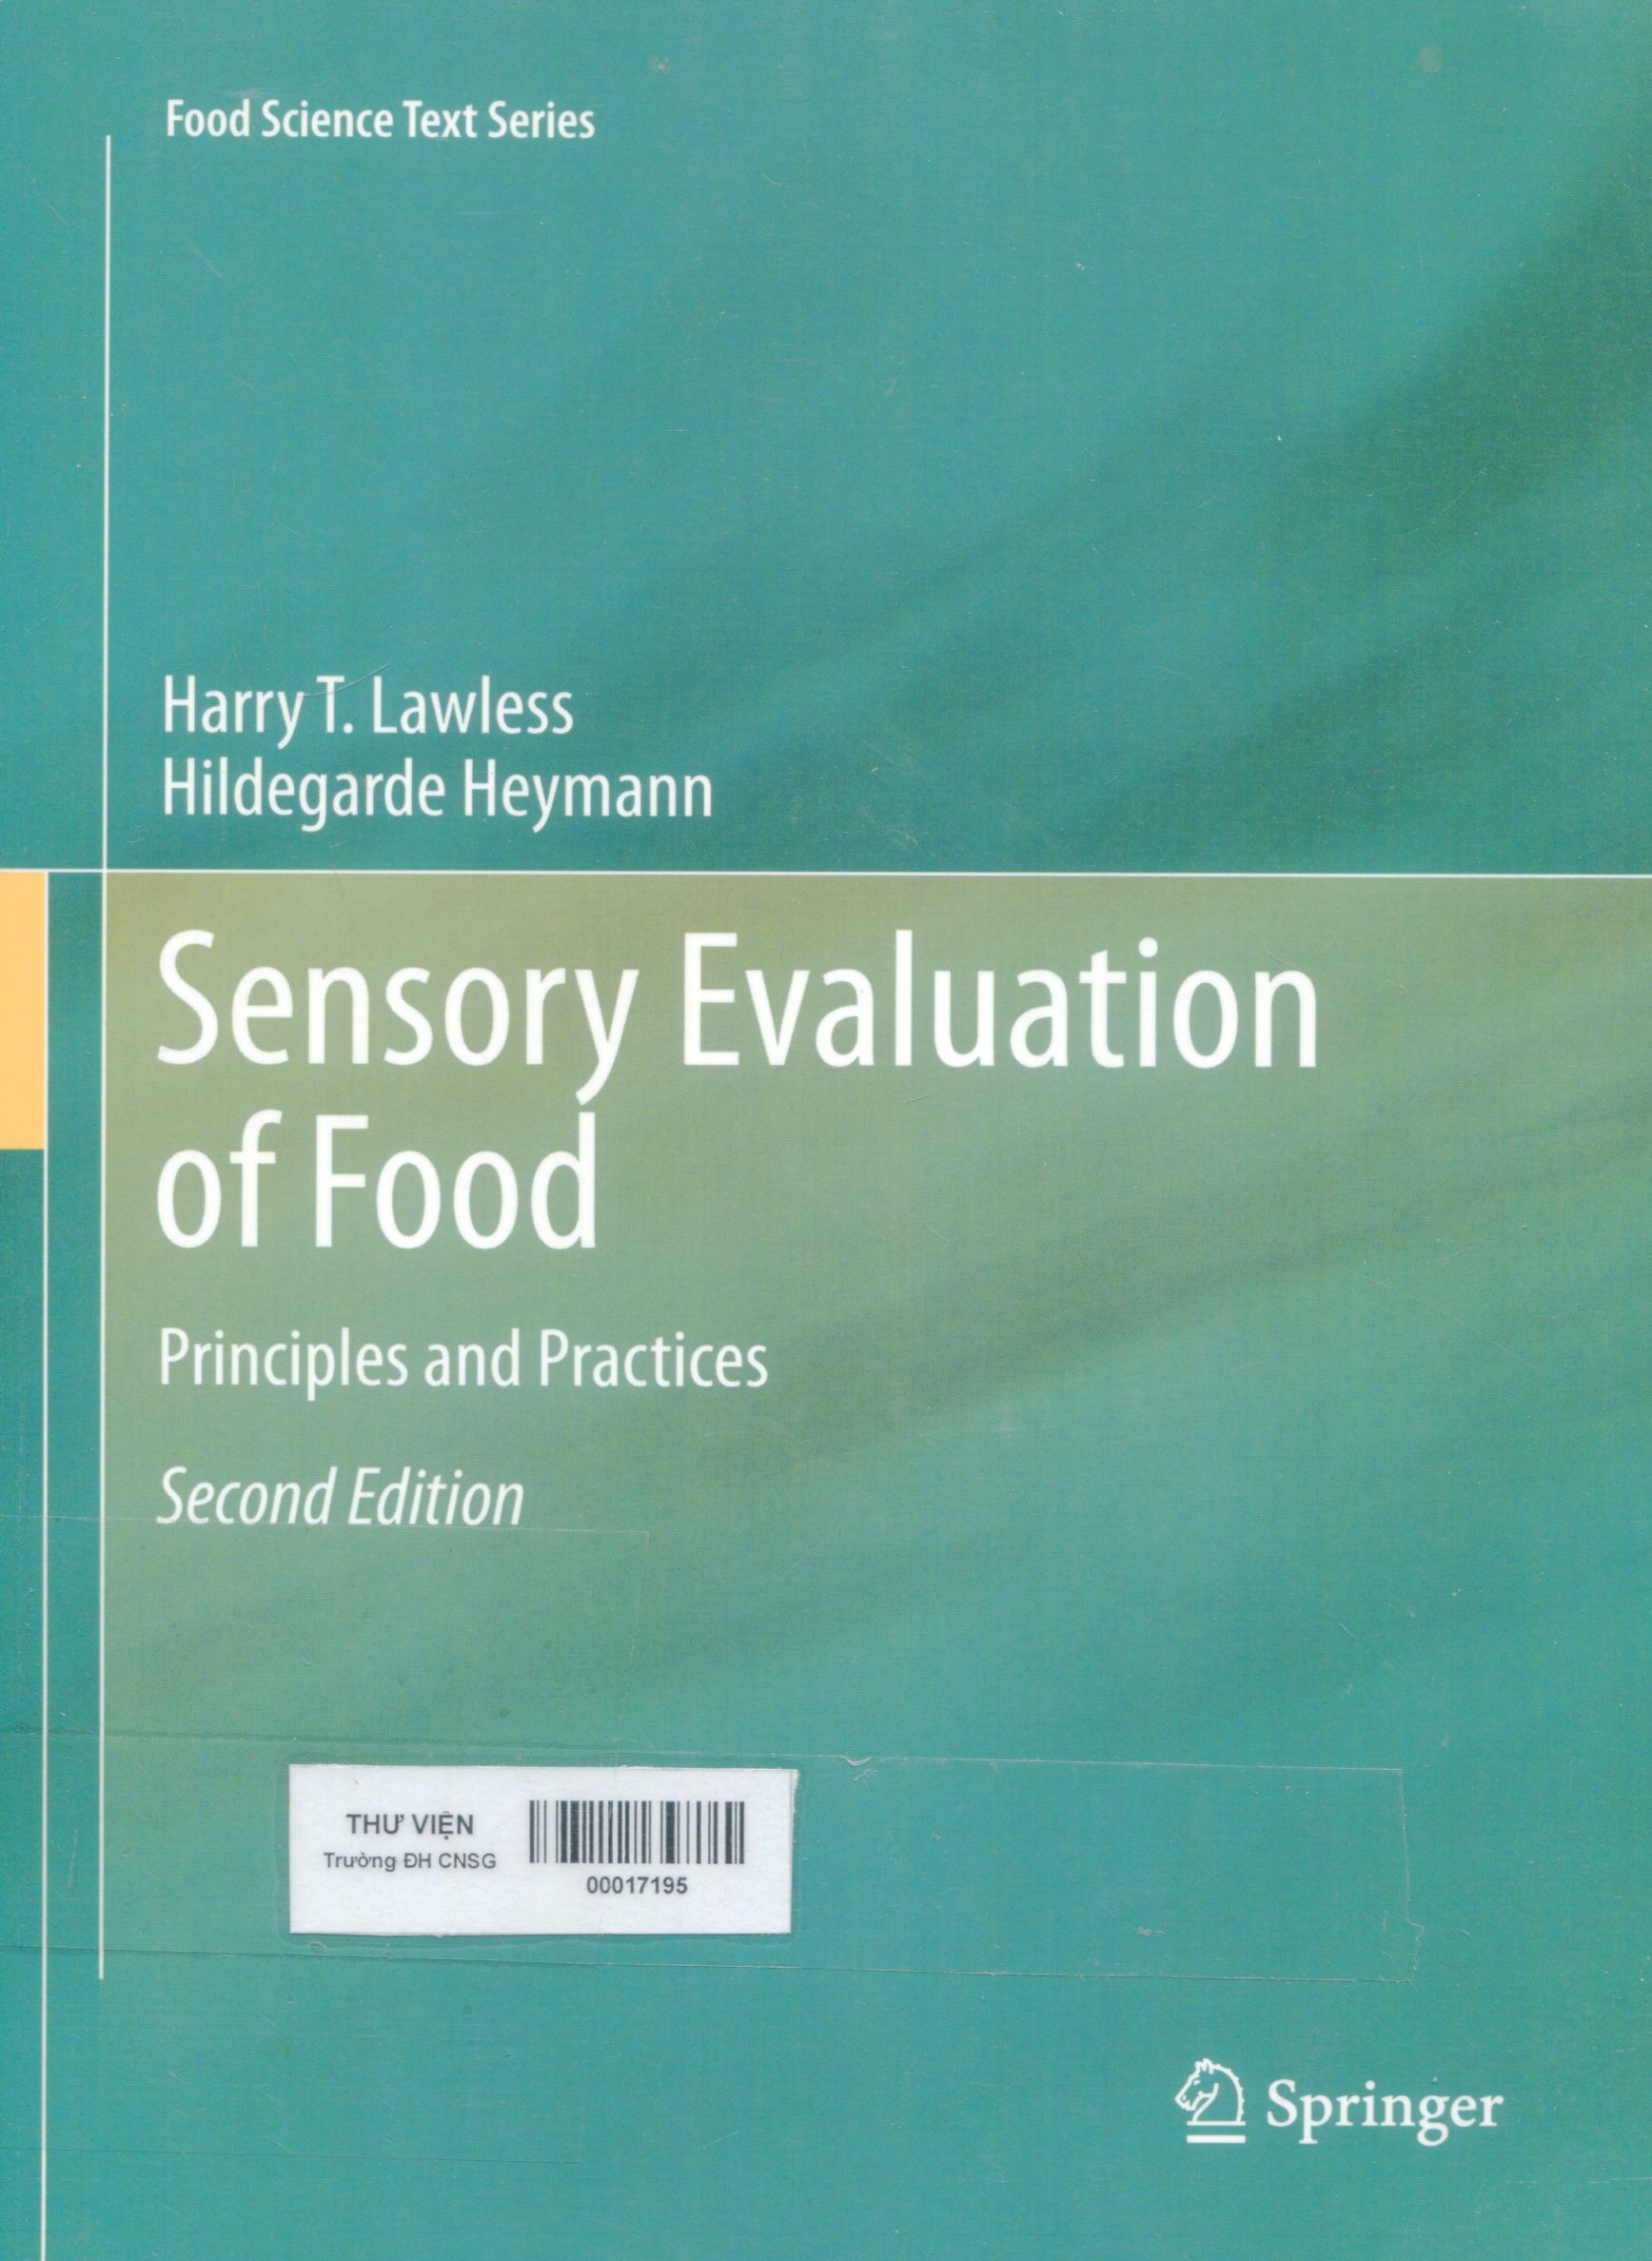 Sensory evaluation of food : principles and practices